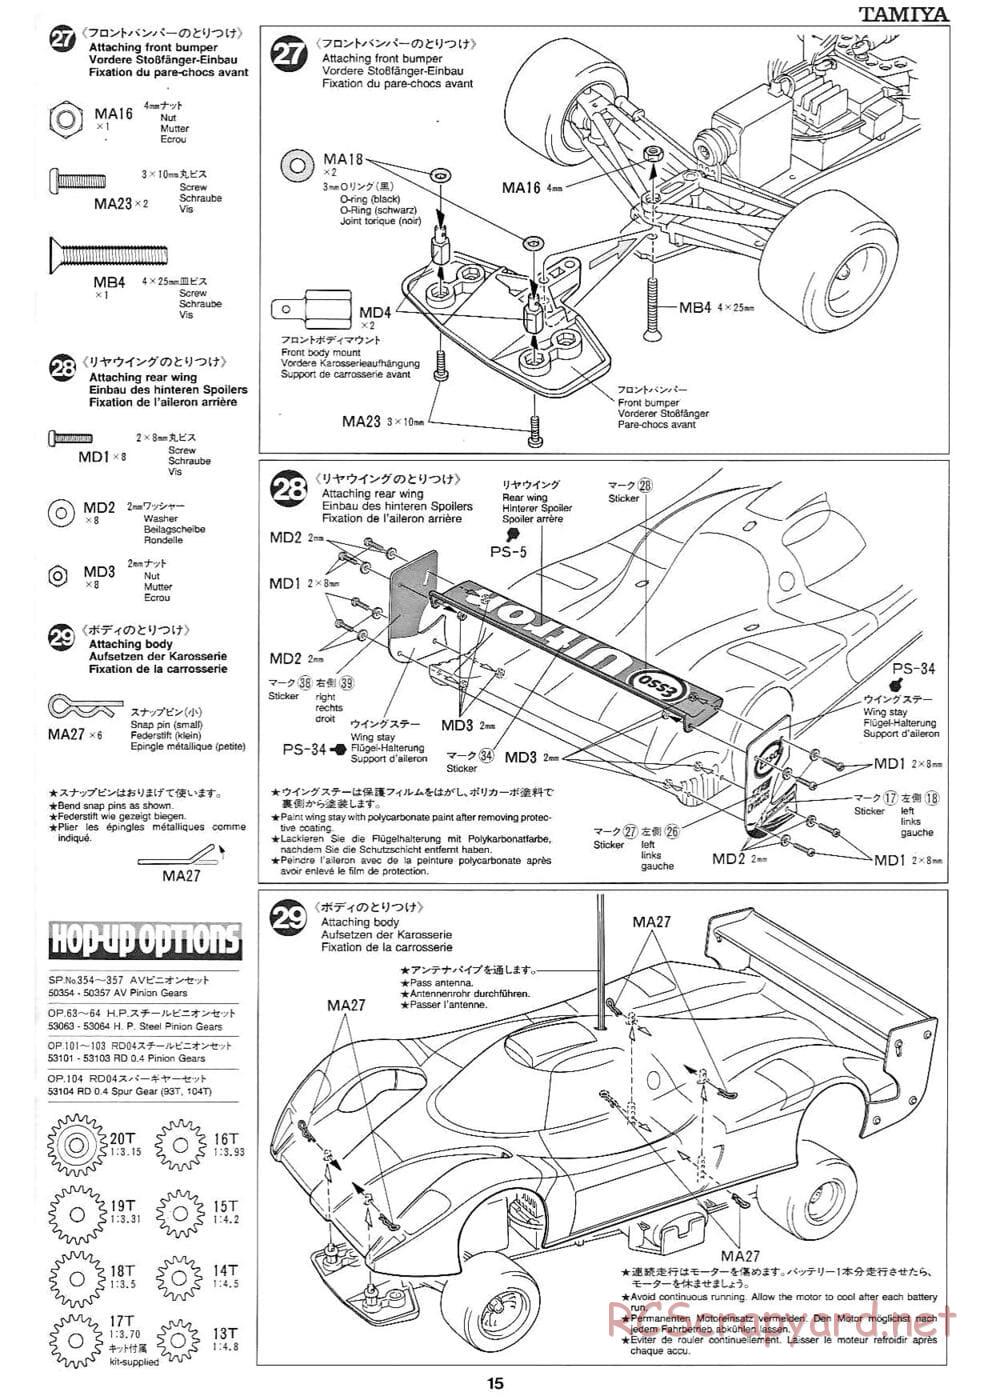 Tamiya - Toyota GT-One TS020 - F103RS Chassis - Manual - Page 15